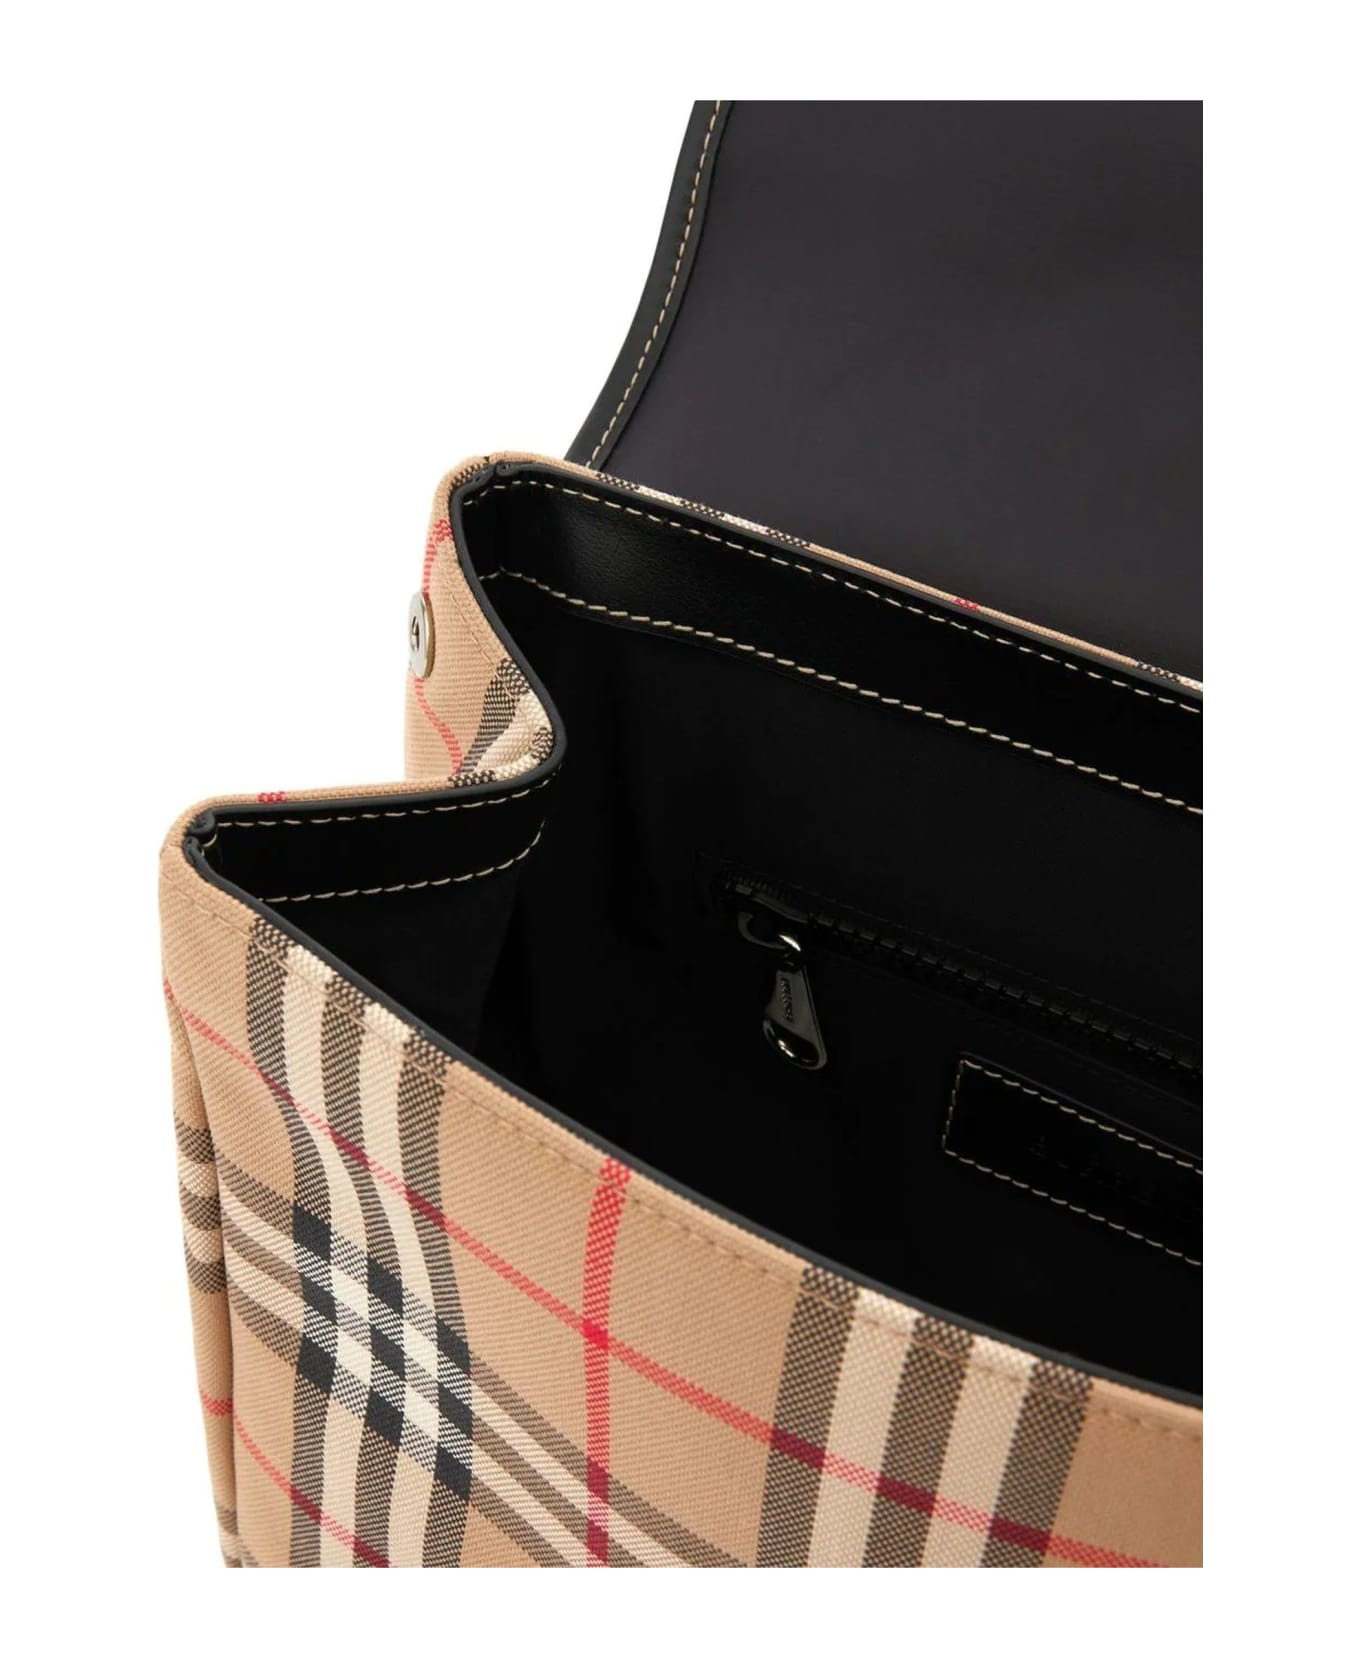 Burberry Check Cotton Backpack - Check